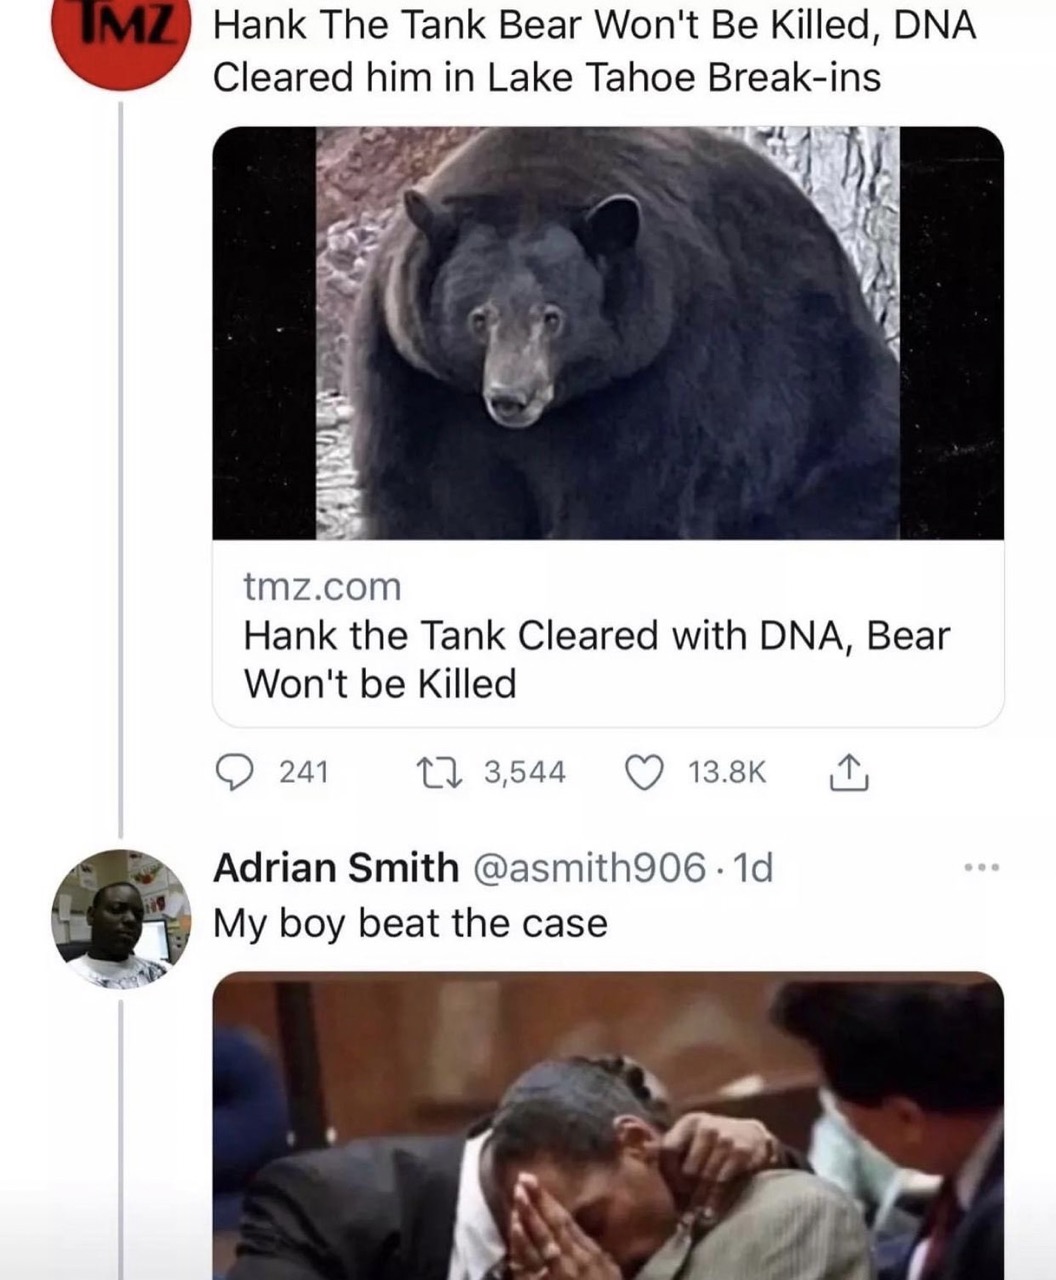 dudes post wins - beat the allegations meme - Imz Hank The Tank Bear Won't Be Killed, Dna Cleared him in Lake Tahoe Breakins tmz.com Hank the Tank Cleared with Dna, Bear Won't be killed 241 27 3,544 1 Adrian Smith My boy beat the case